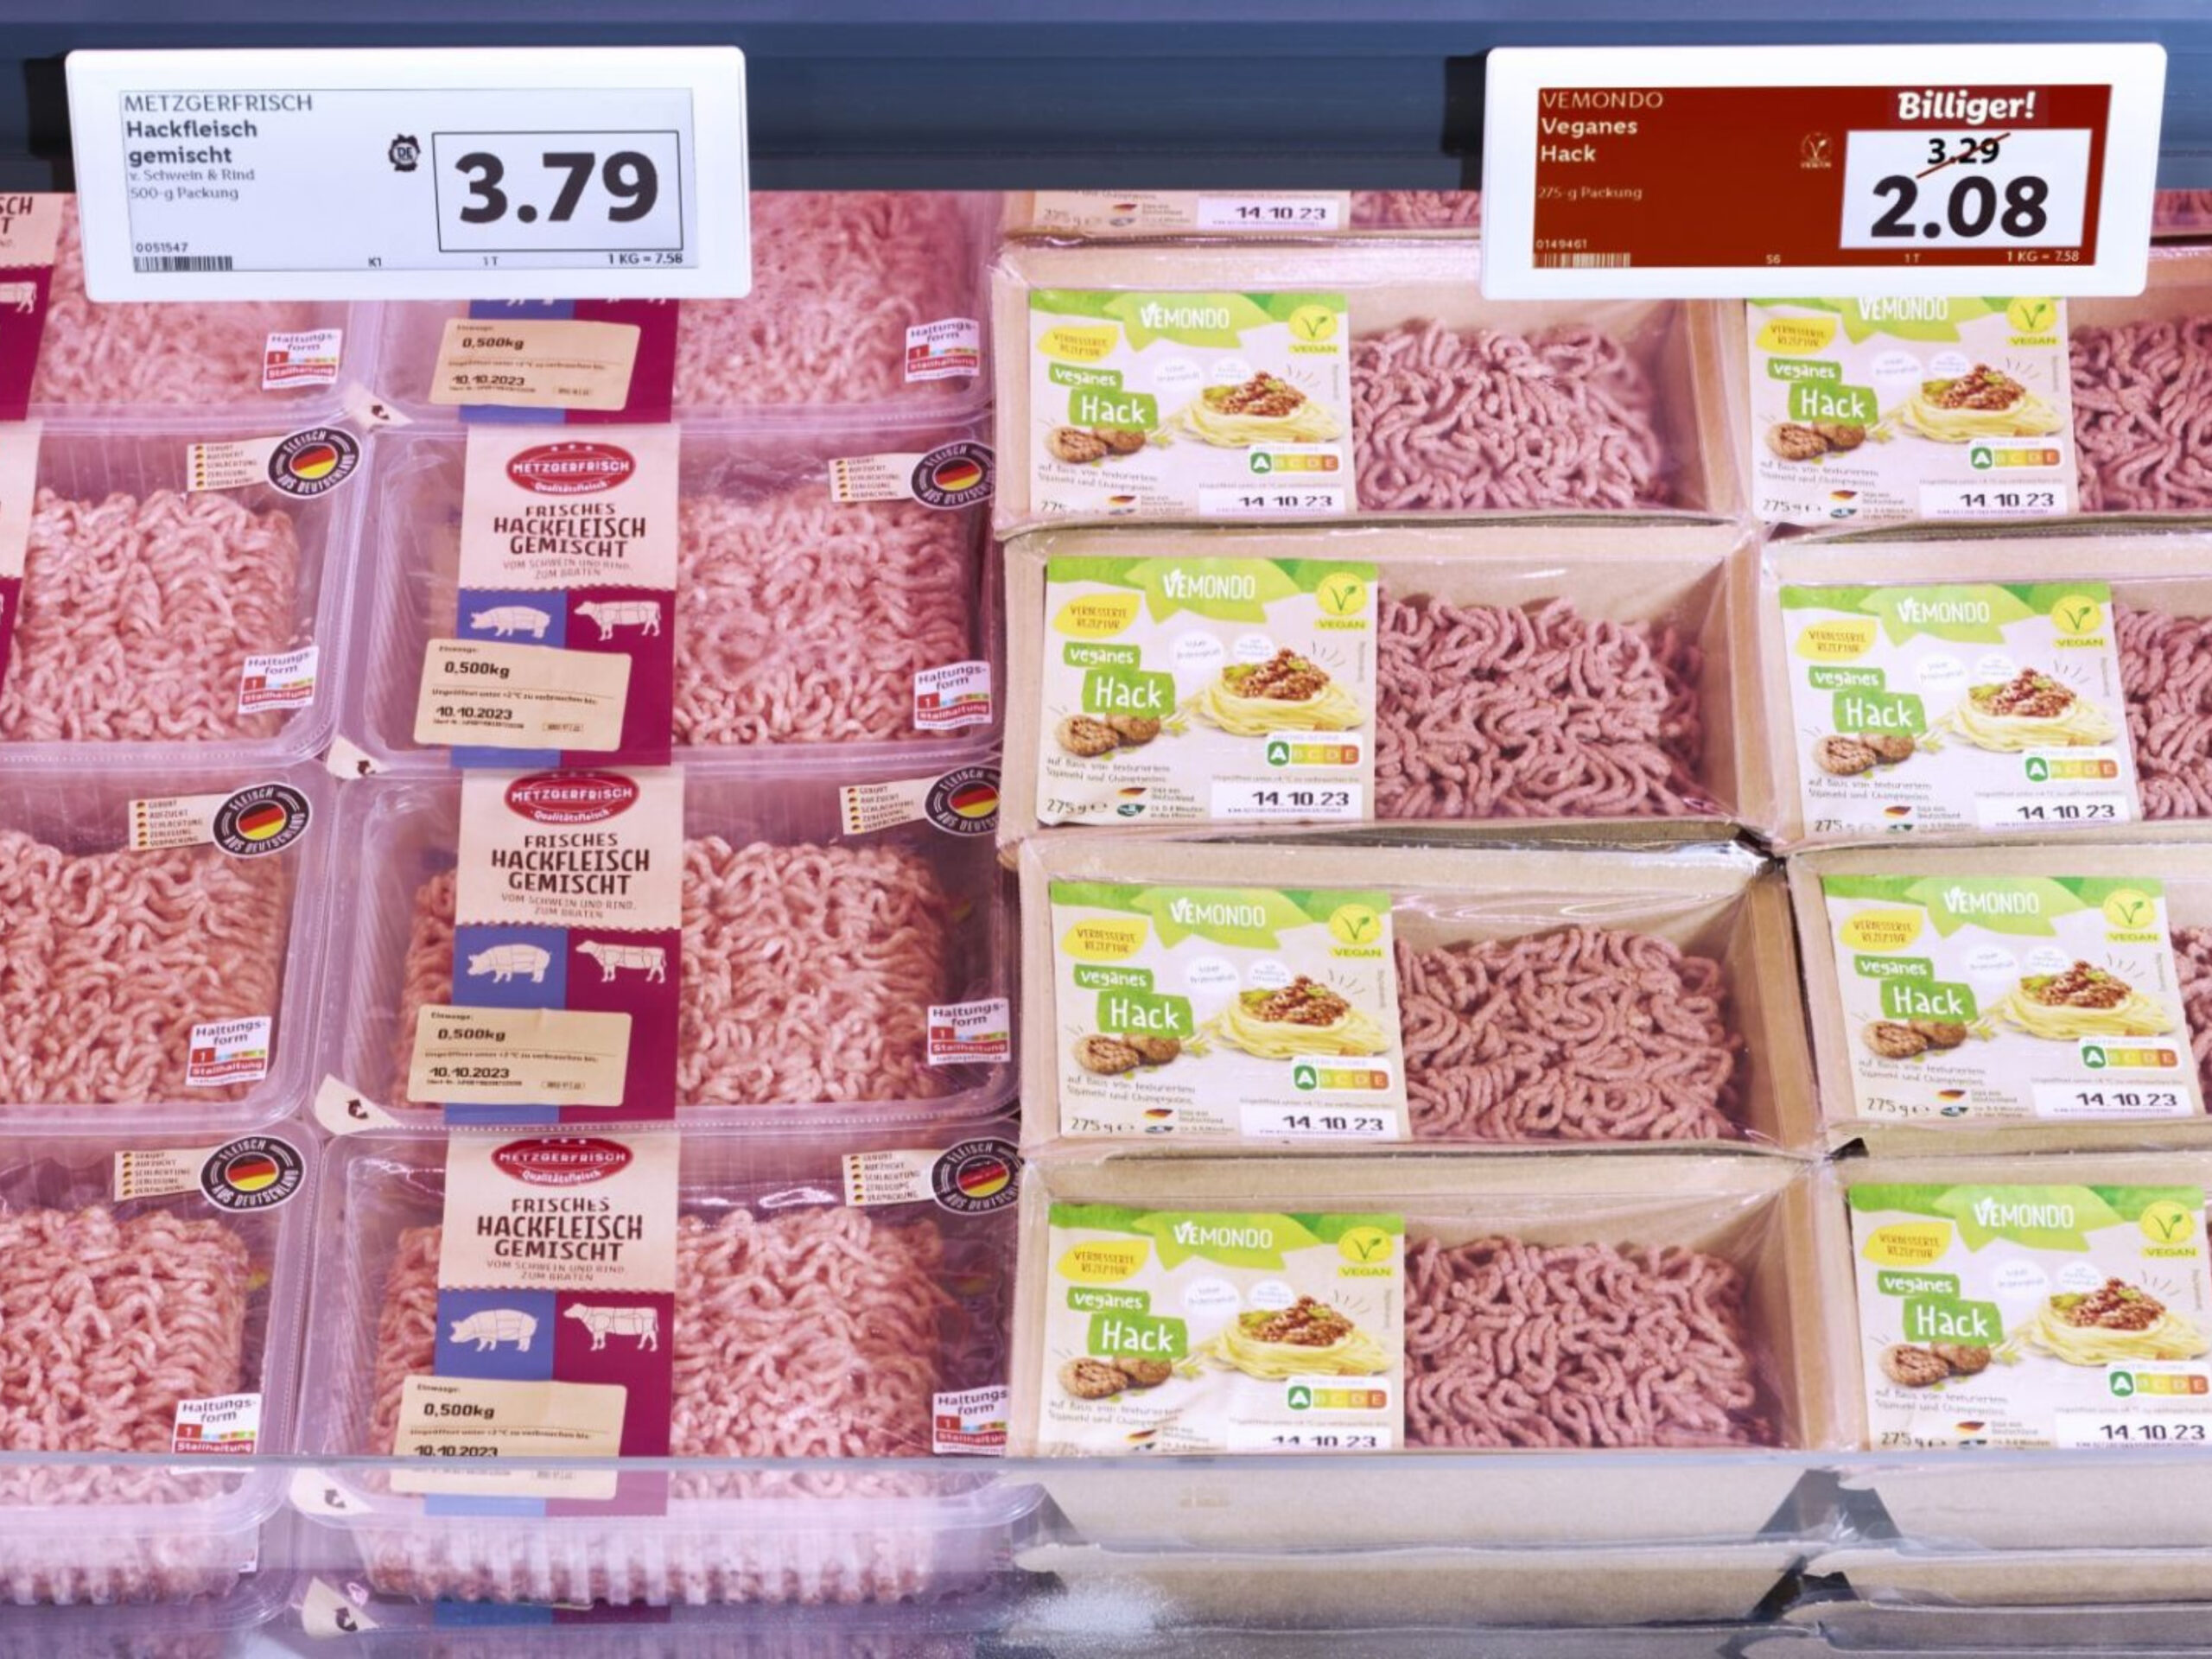 Plant-Based Price Same as Meat Parity: & the Cost Range Vemondo Lidl\'s to Dairy